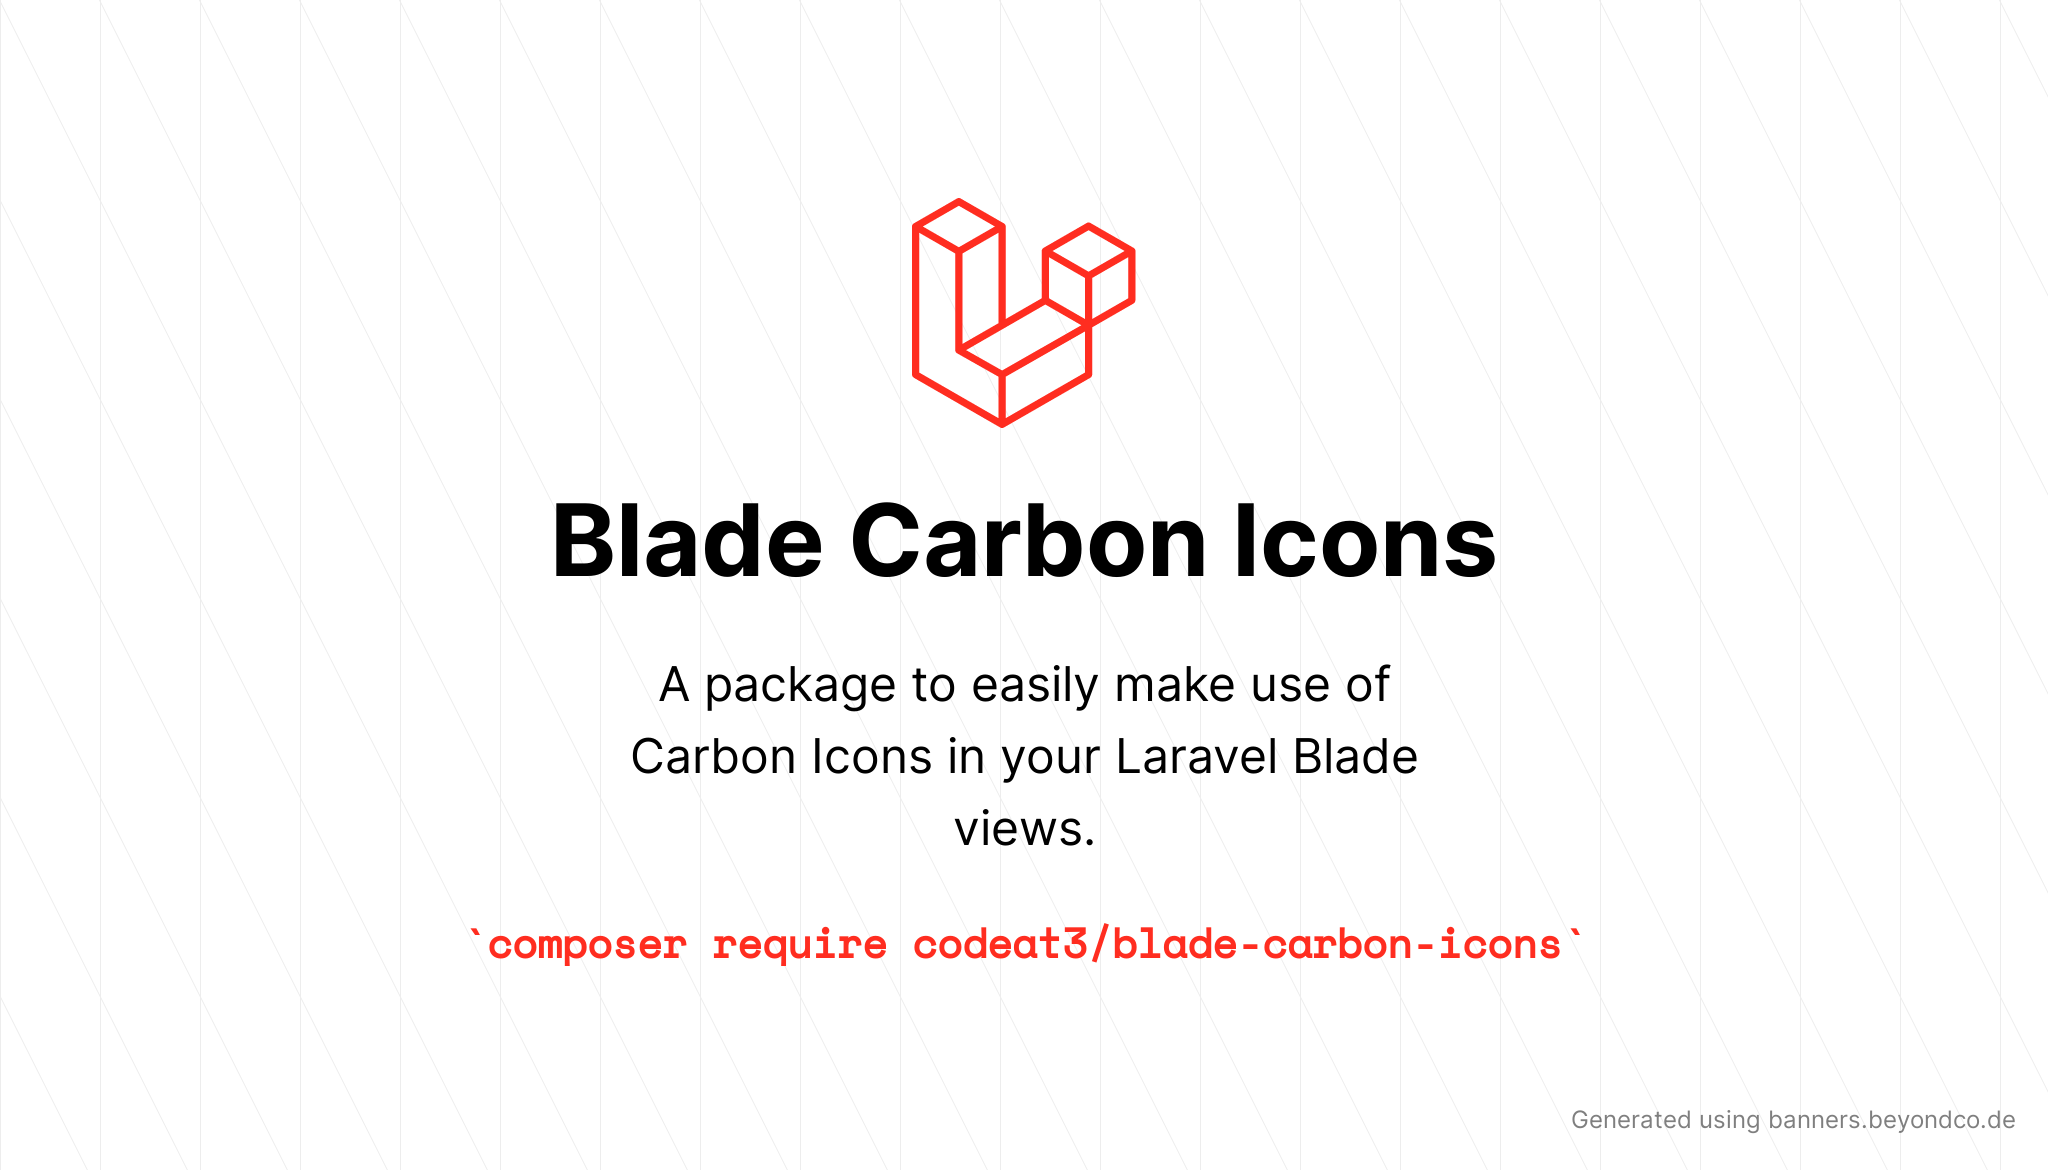 socialcard-blade-carbon-icons.png